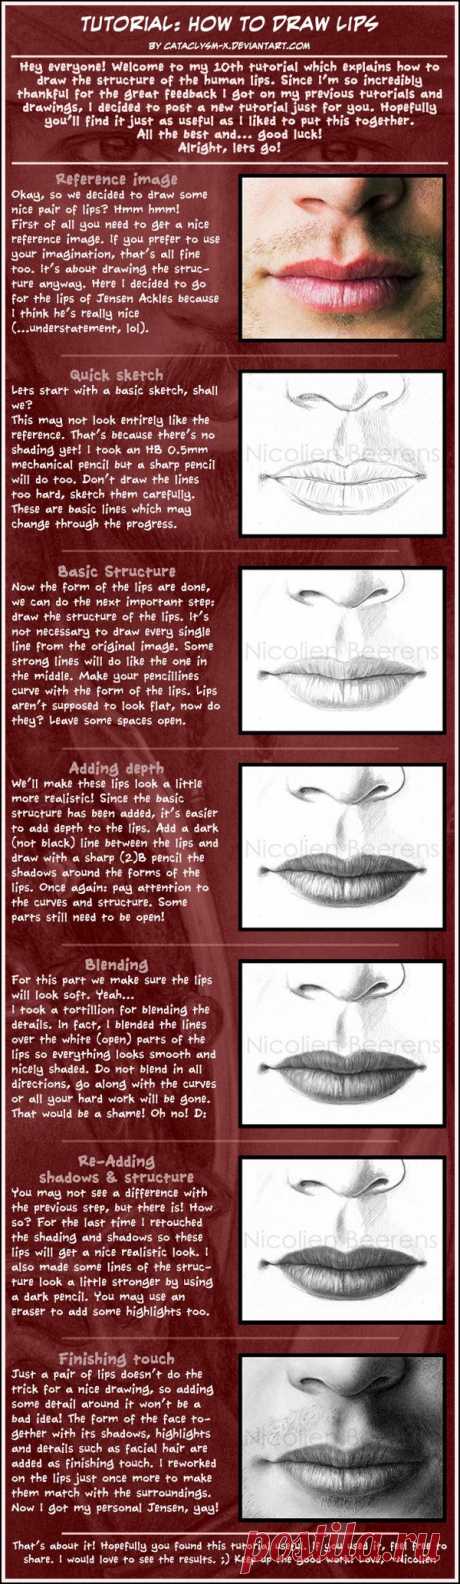 Tutorials: How to draw lips by Cataclysm-X on DeviantArt